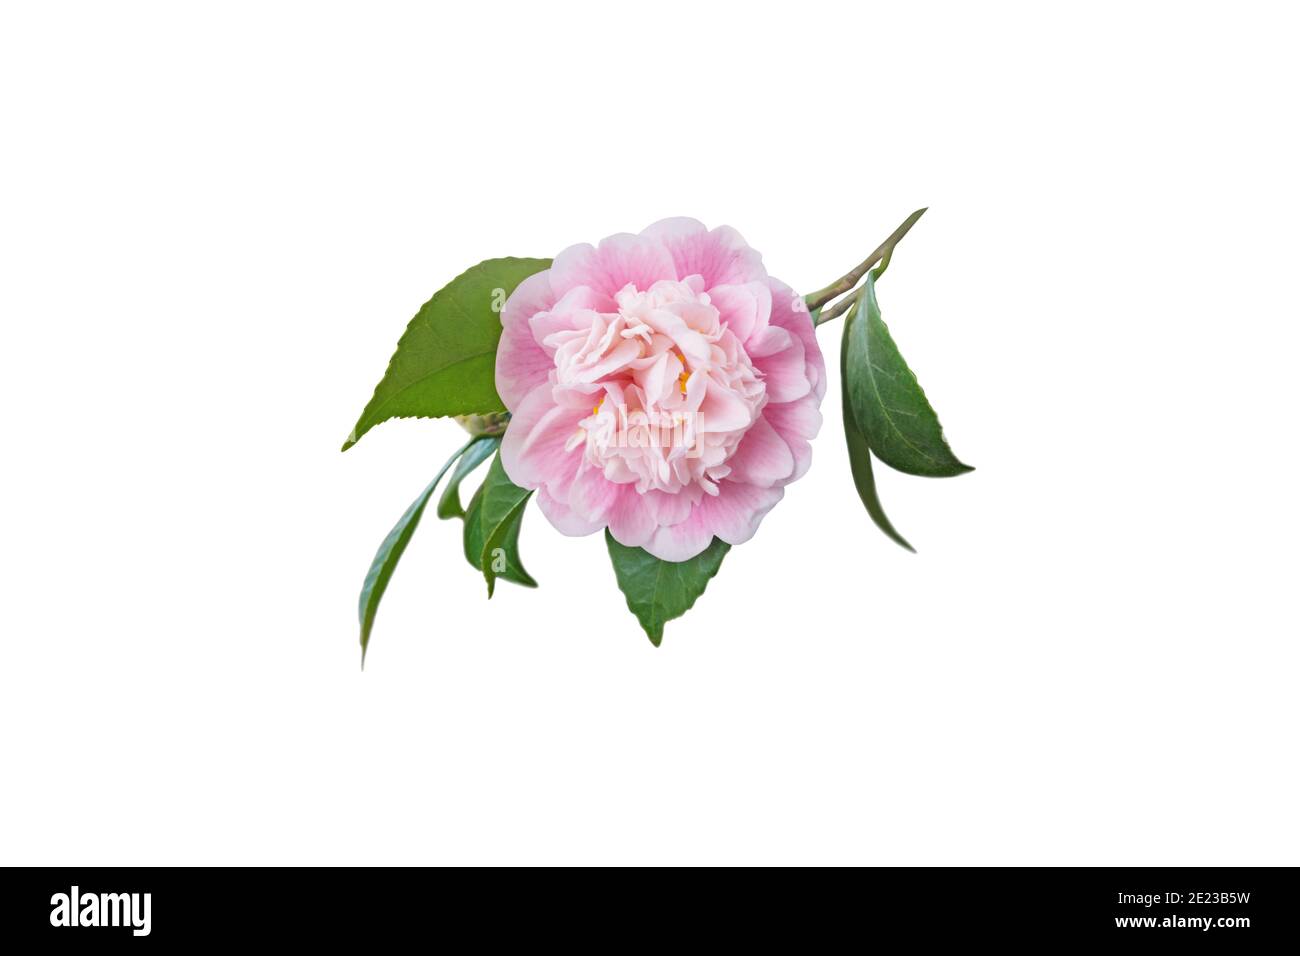 Pale pink camellia japonica peony form flower and leaves isolated on white. Japanese tsubaki. Stock Photo